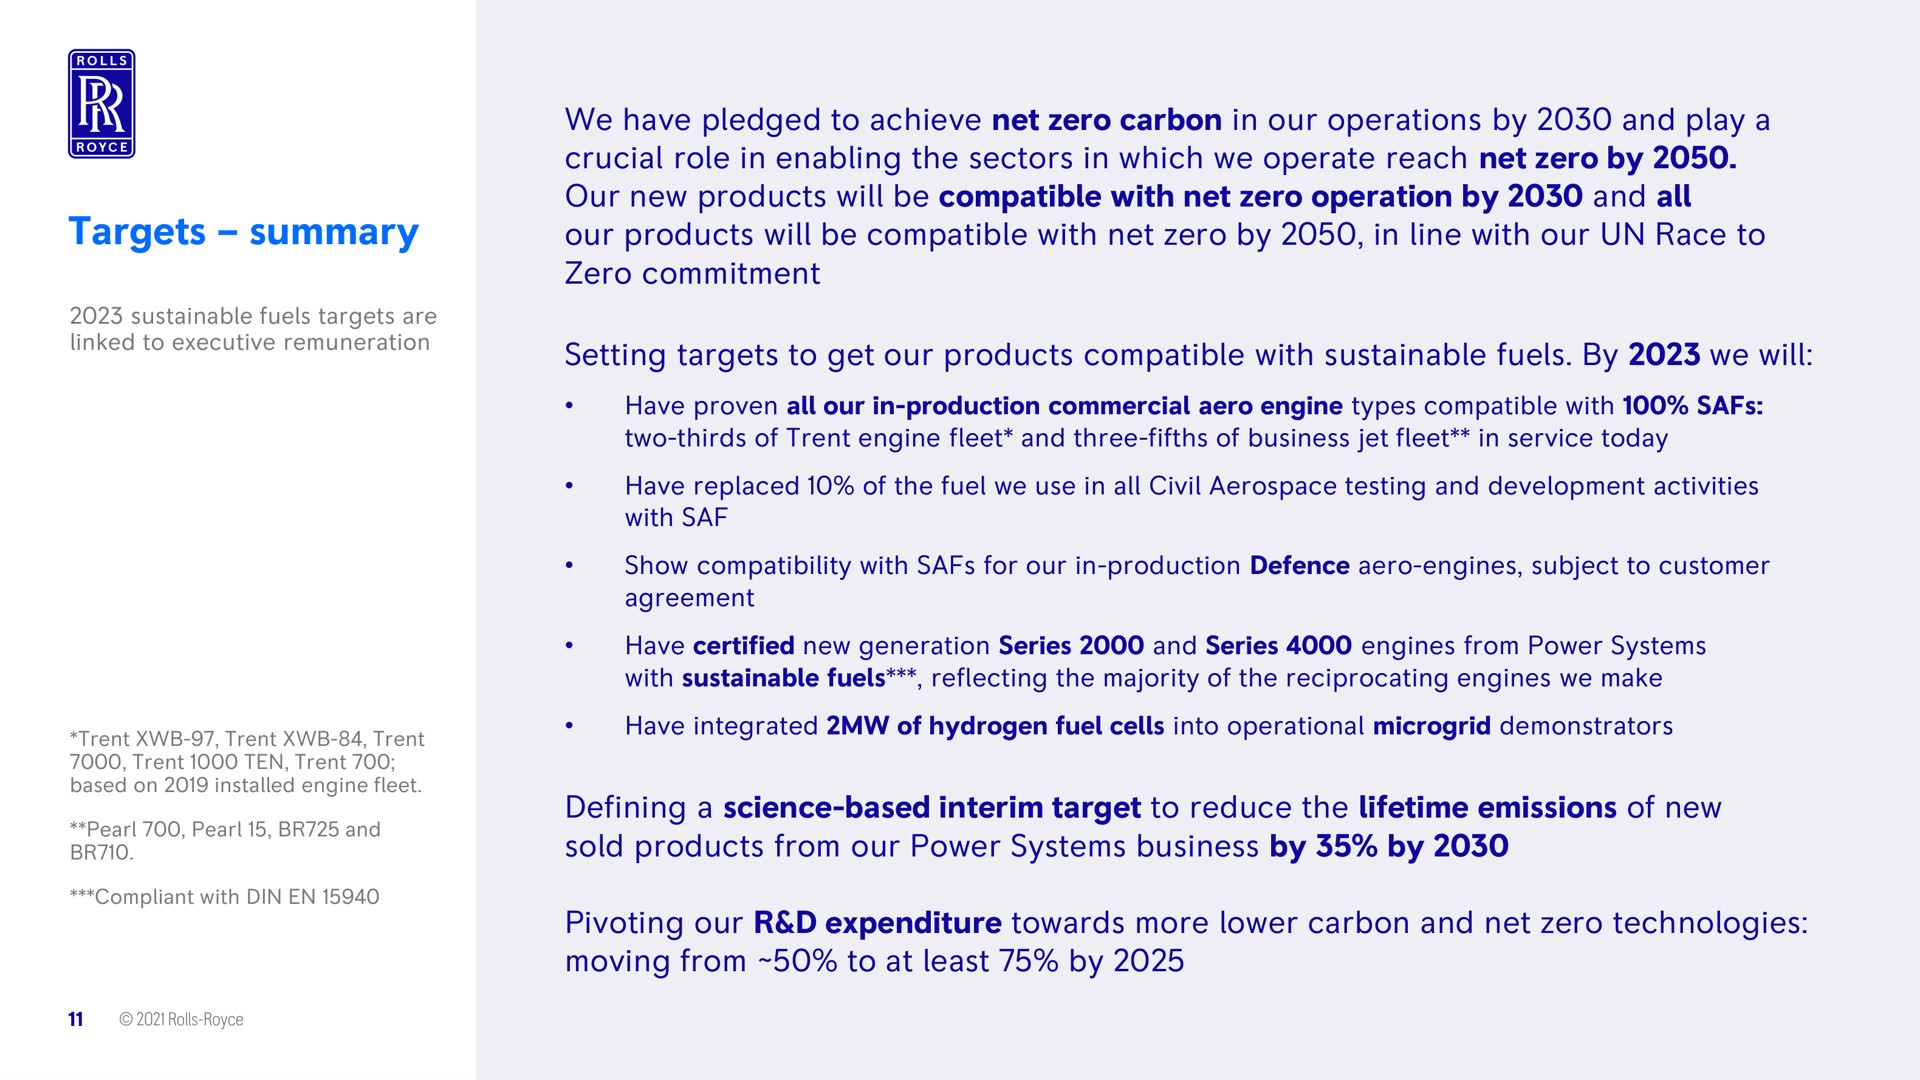 targets summary sustainable fuels targets are linked to executive remuneration we have pledged to achieve net zero carbon in our operations by and play a crucial role in enabling the sectors in which we operate reach net zero by our new products will be compatible with net zero operation by and all our products will be compatible with net zero by in line with our race to zero commitment setting targets to get our products compatible with sustainable fuels by we will have proven all our in production commercial aero engine types compatible with two thirds of engine fleet and three fifths of business jet fleet in service today have replaced of the fuel we use in all civil testing and development activities with show compatibility with for our in production defence aero engines subject to customer agreement have certified new generation series and series engines from power systems with sustainable fuels reflecting the majority of the reciprocating engines we make have integrated of hydrogen fuel cells into operational demonstrators defining a science based interim target to reduce the lifetime emissions of new sold products from our power systems business by by pivoting our expenditure towards more lower carbon and net zero technologies moving from to at least by based on i compliant din rolls | Rolls-Royce Holdings